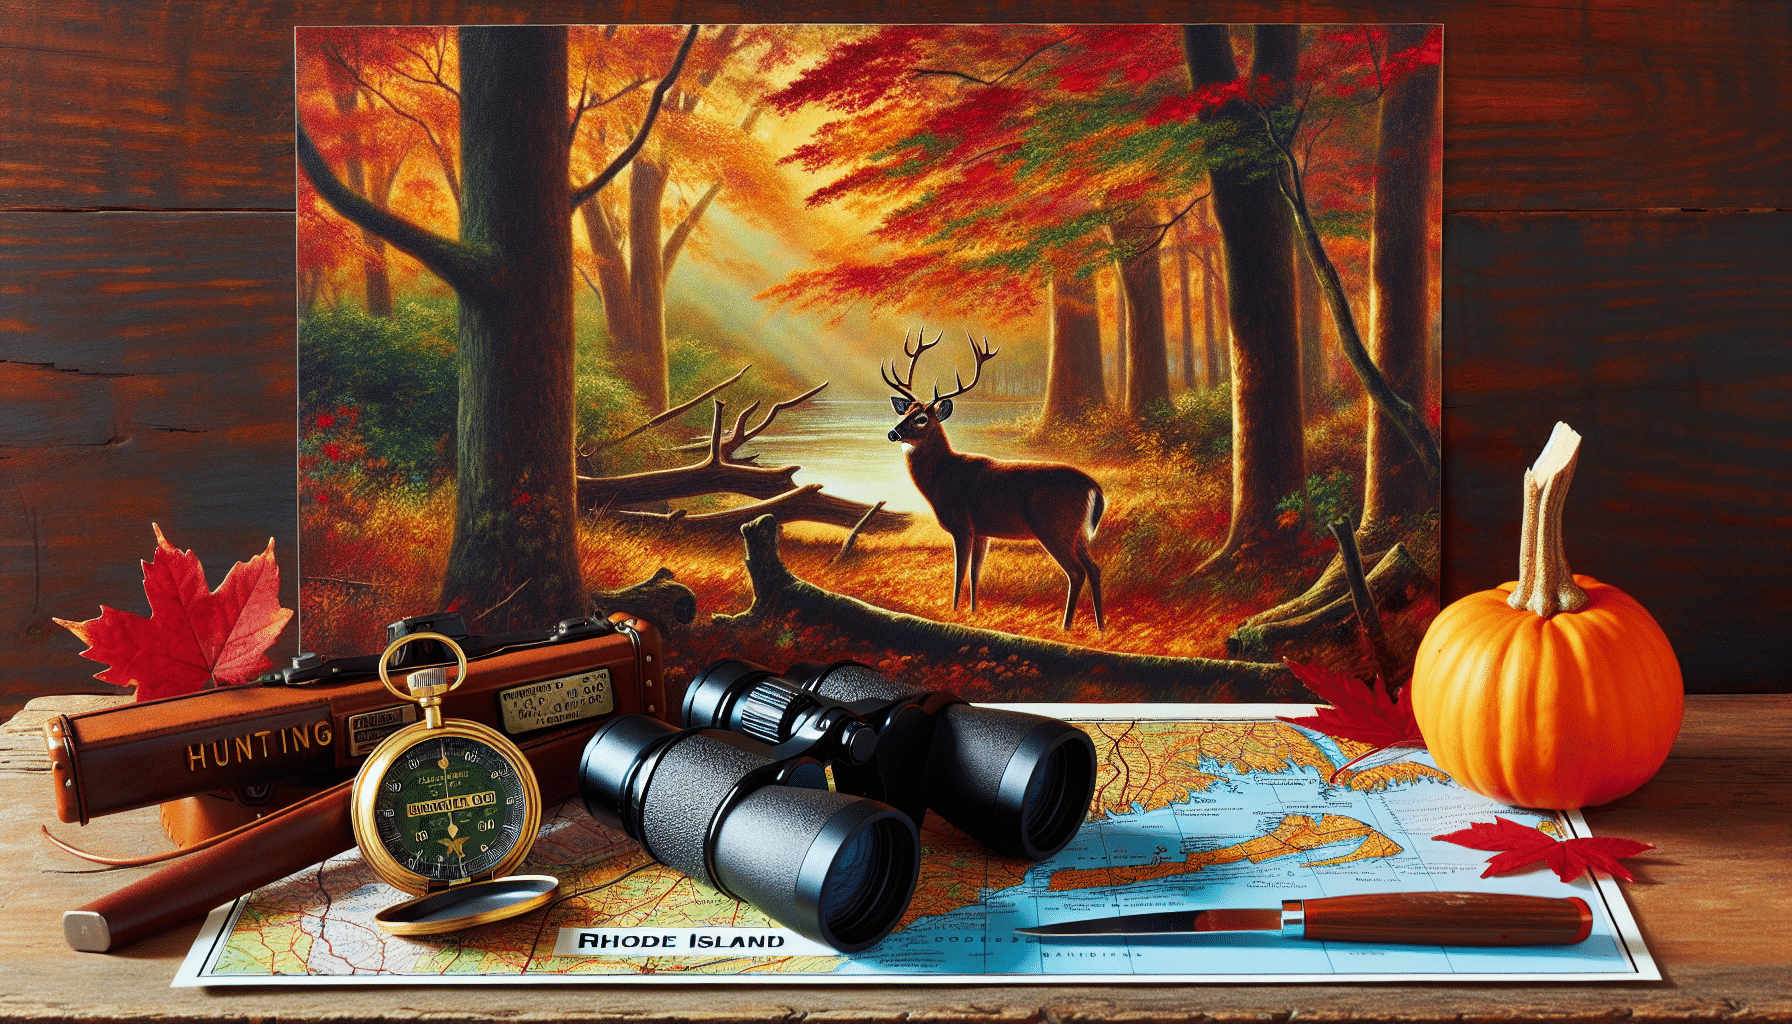 A depiction of a serene autumn landscape in Rhode Island, the falling leaves in hues of orange, red and yellow. A deer is seen subtly in the background, amidst the dense foliage of the forest. In the foreground, hunting gear such as binoculars, a compass, and a map of Rhode Island are carefully arranged on a log. Do not include people or any brand names or logos in the picture.